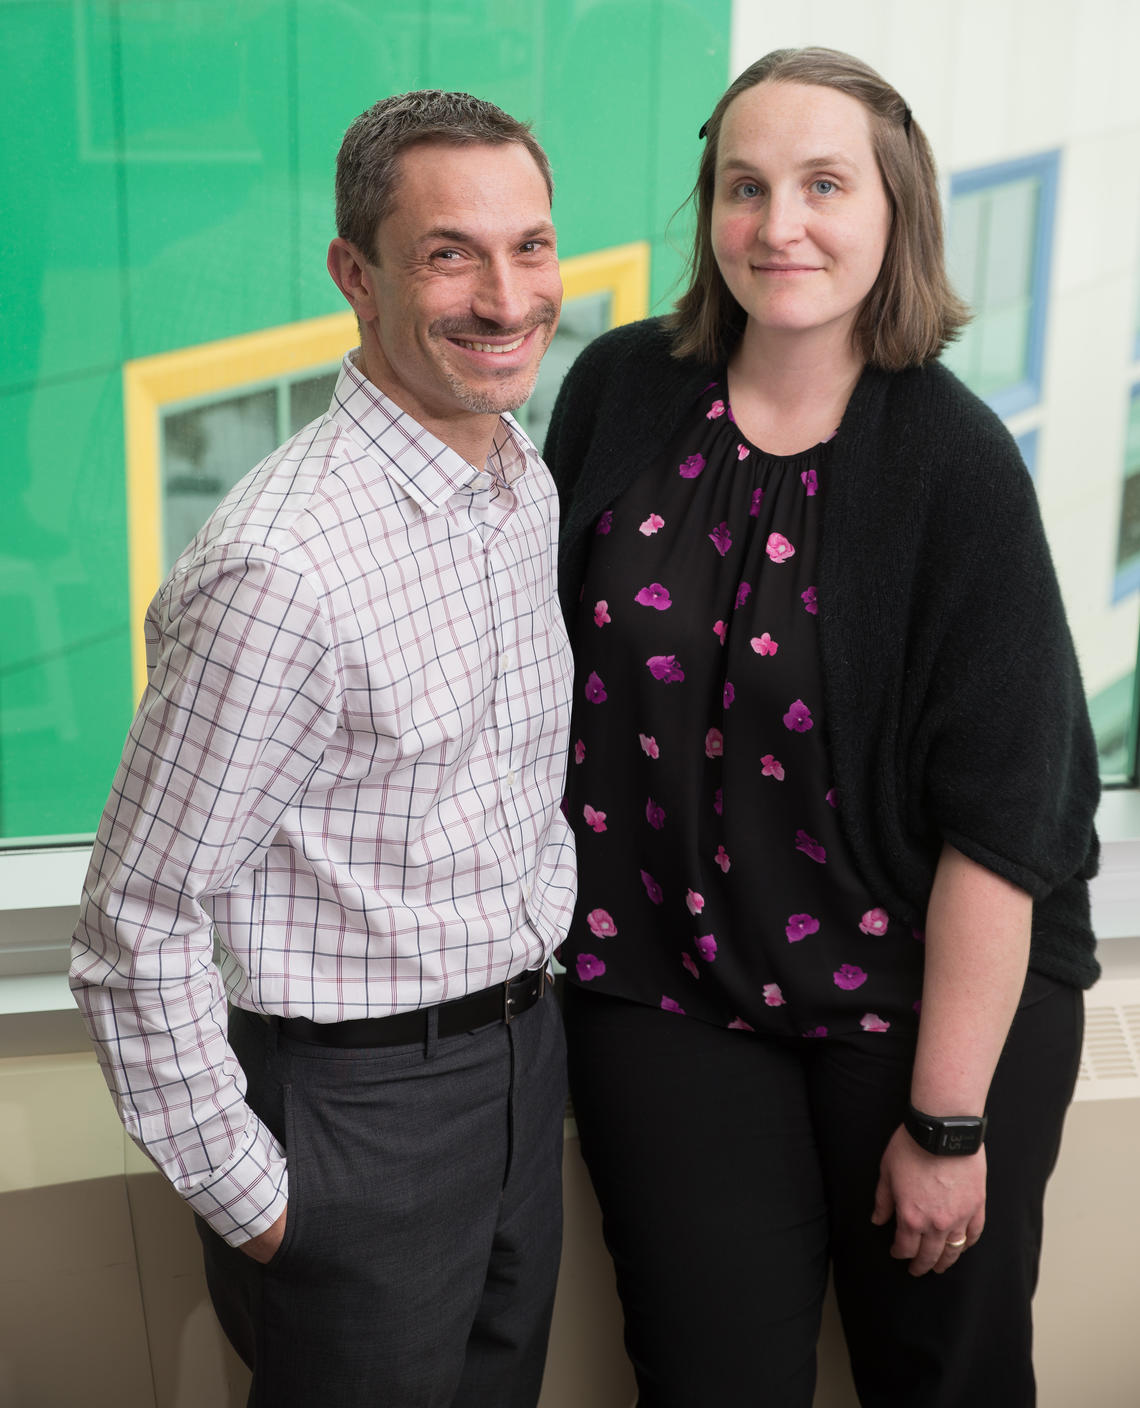 Dr. Stephen Freedman is supervising Gillian Tarr’s project at the Alberta Children’s Hospital. The emergency department receives thousands of visits every year from children suffering from vomiting and diarrhea related to intestinal infections.